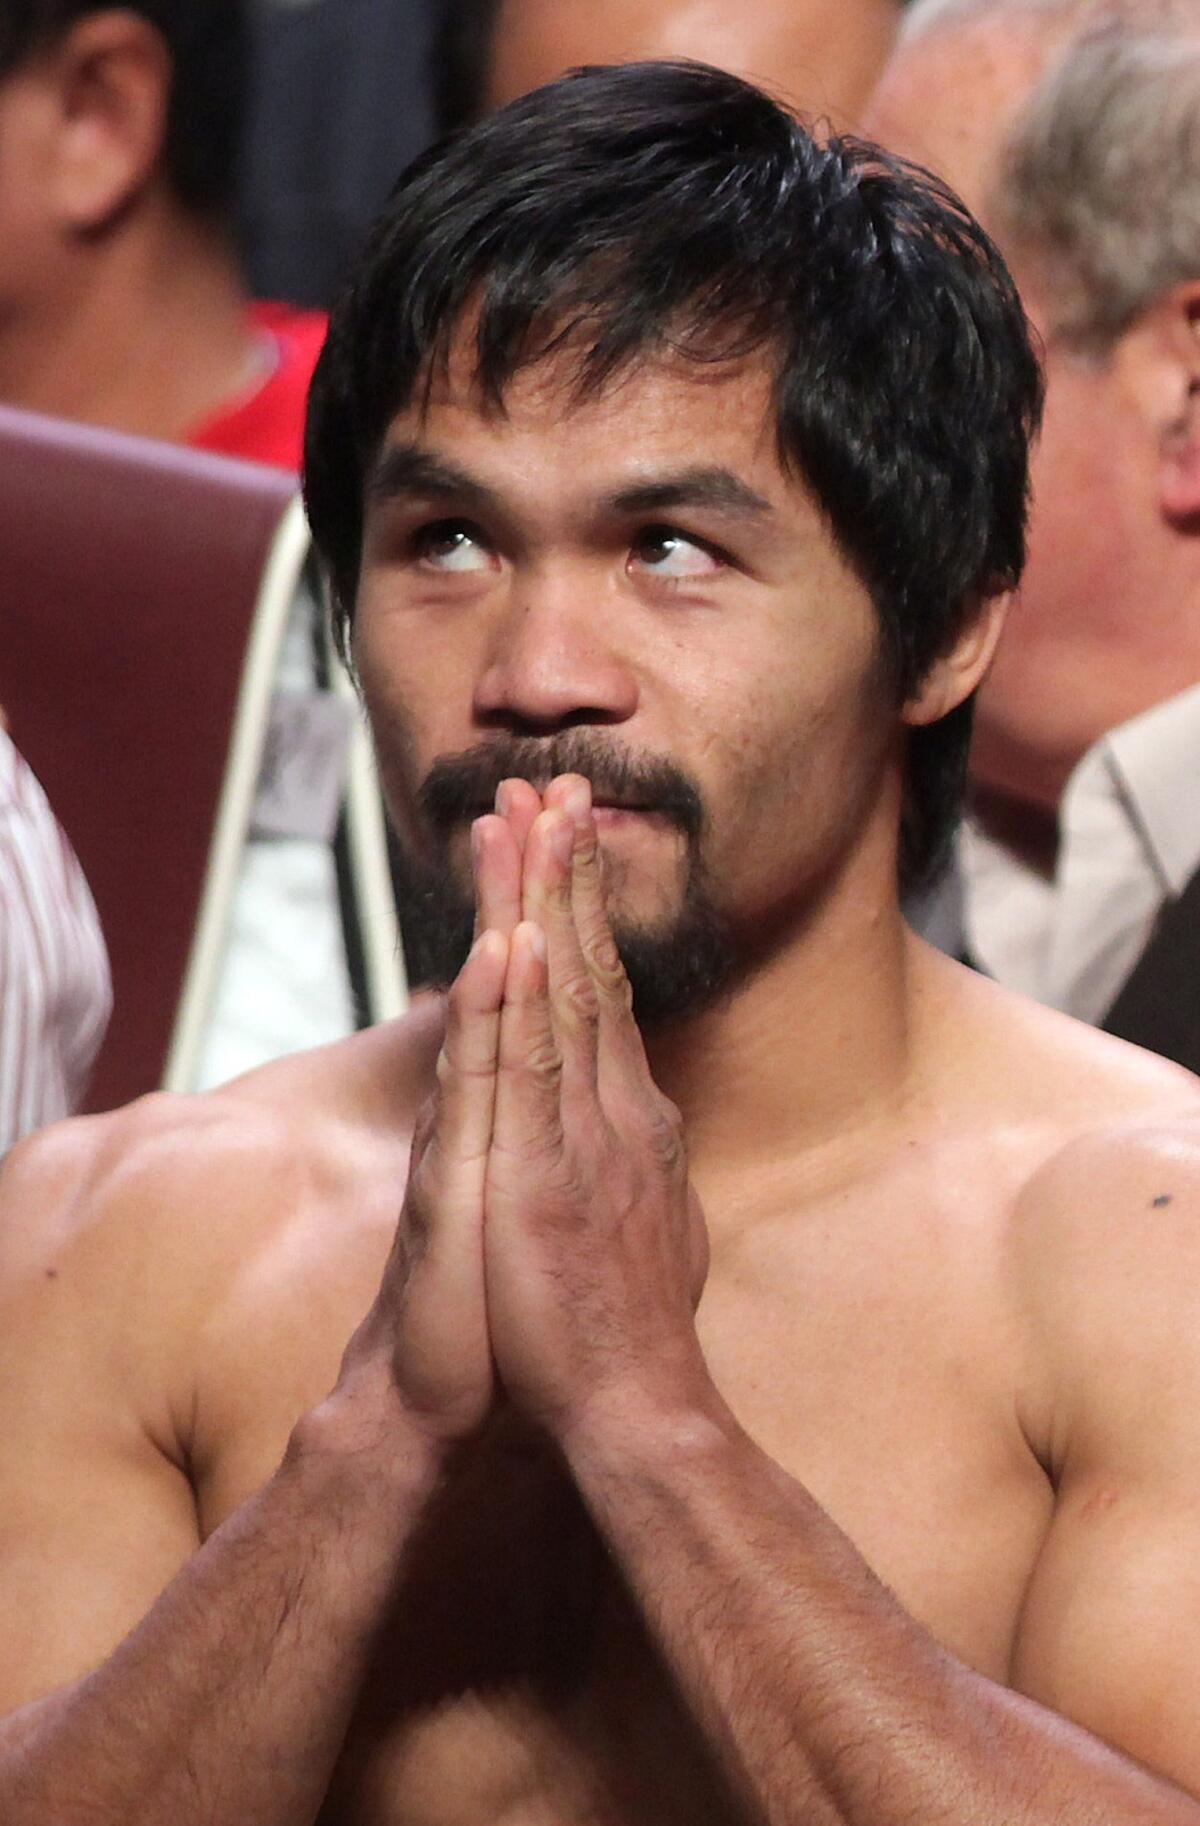 Manny Pacquiao of the Philippines posing during his weigh-in with Juan Manuel Marquez of Mexico.